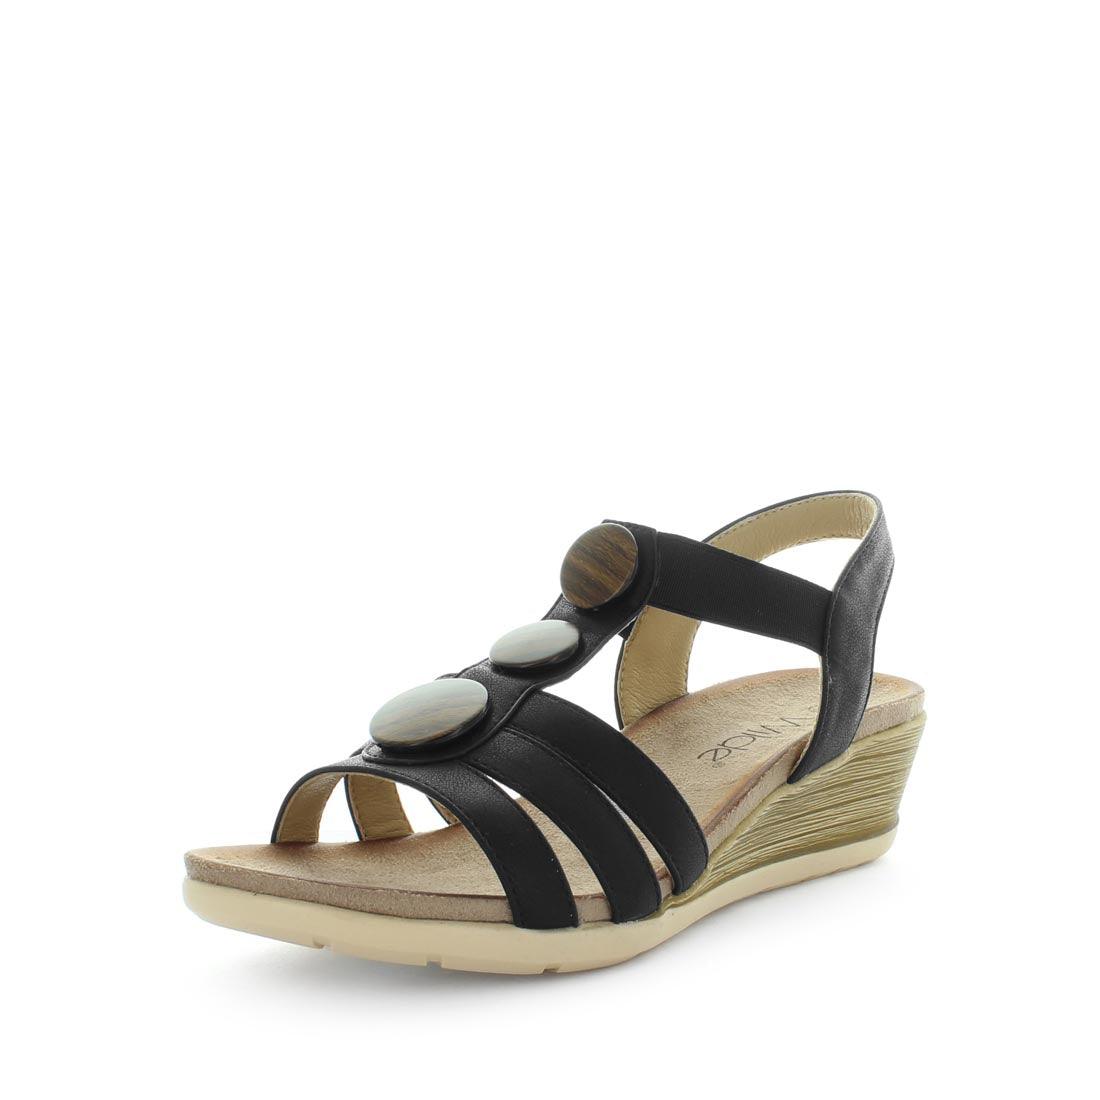 SAURA by WILDE - iShoes - NEW ARRIVALS, What's New, What's New: Most Popular, What's New: Women's New Arrivals, Women's Shoes: Sandals - FOOTWEAR-FOOTWEAR